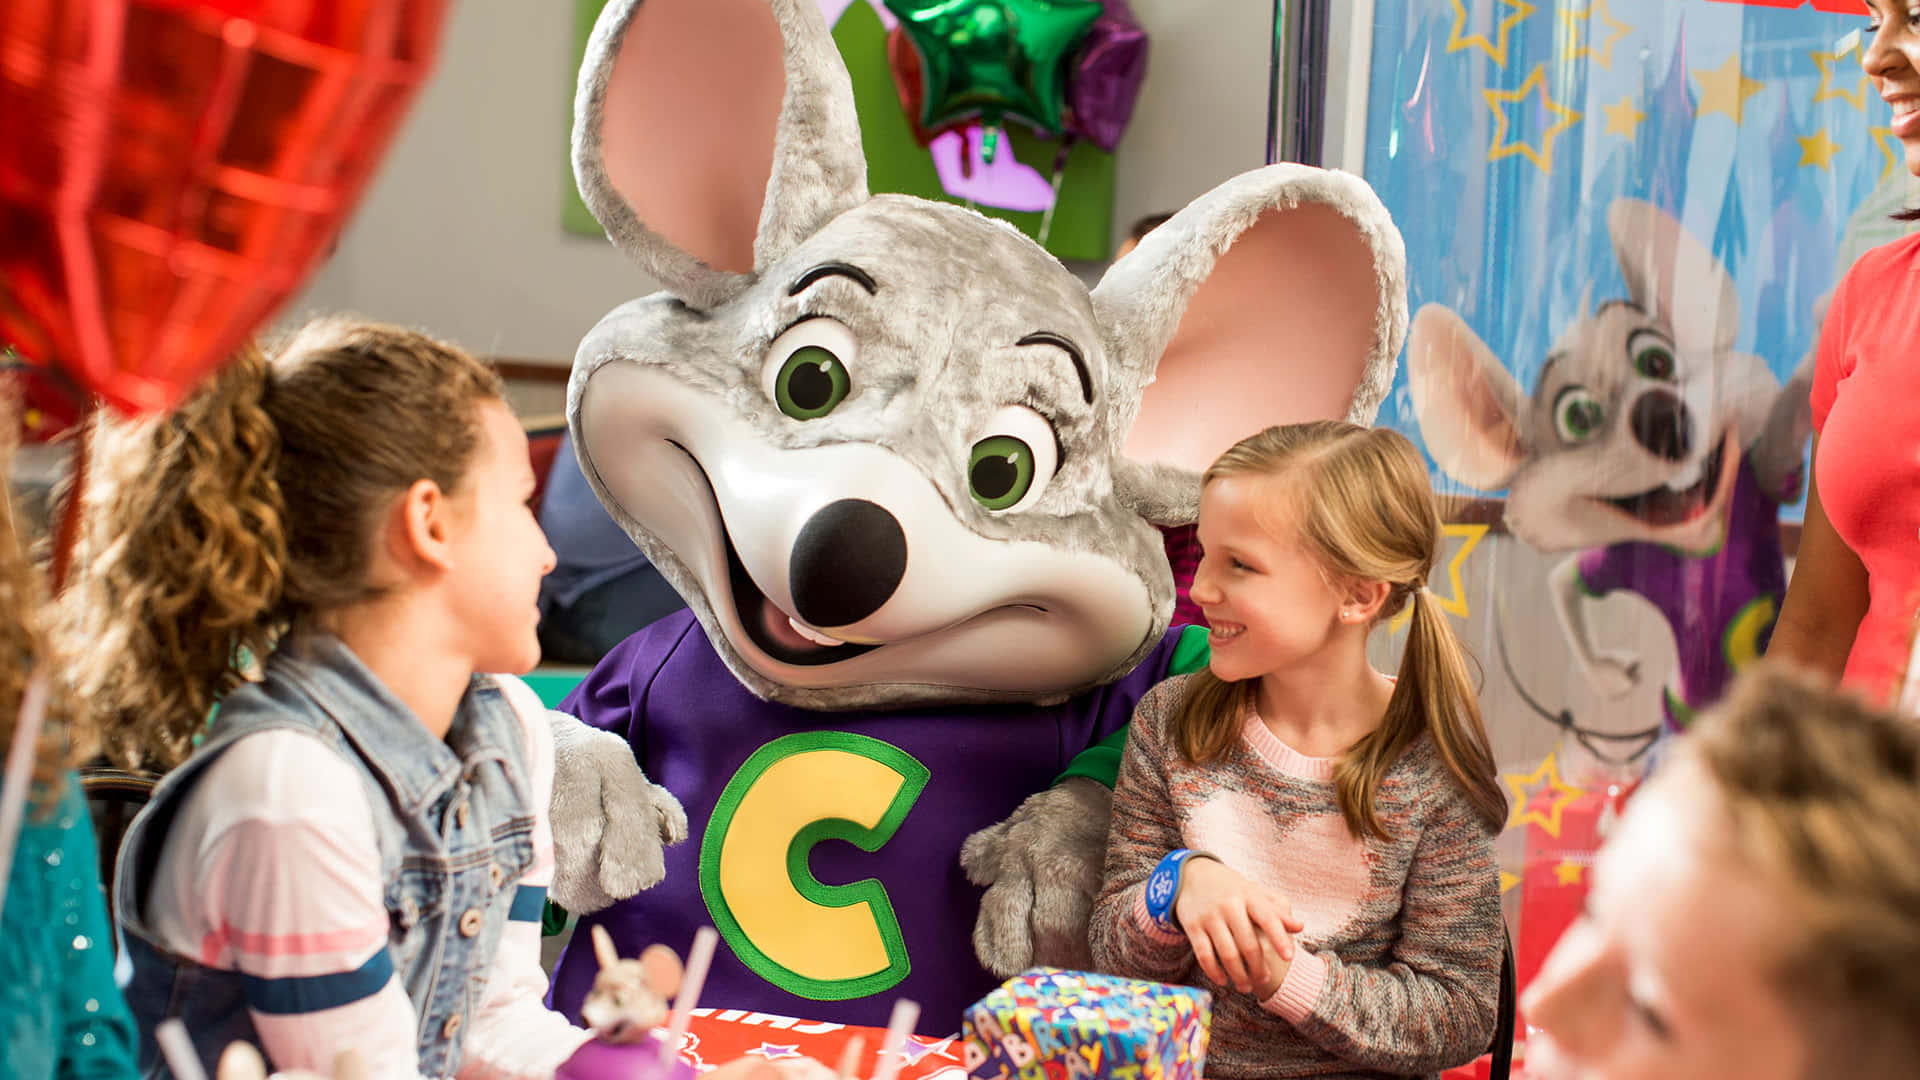 Enjoy mouth-watering pizza, drinks, and games at Chuck E Cheese